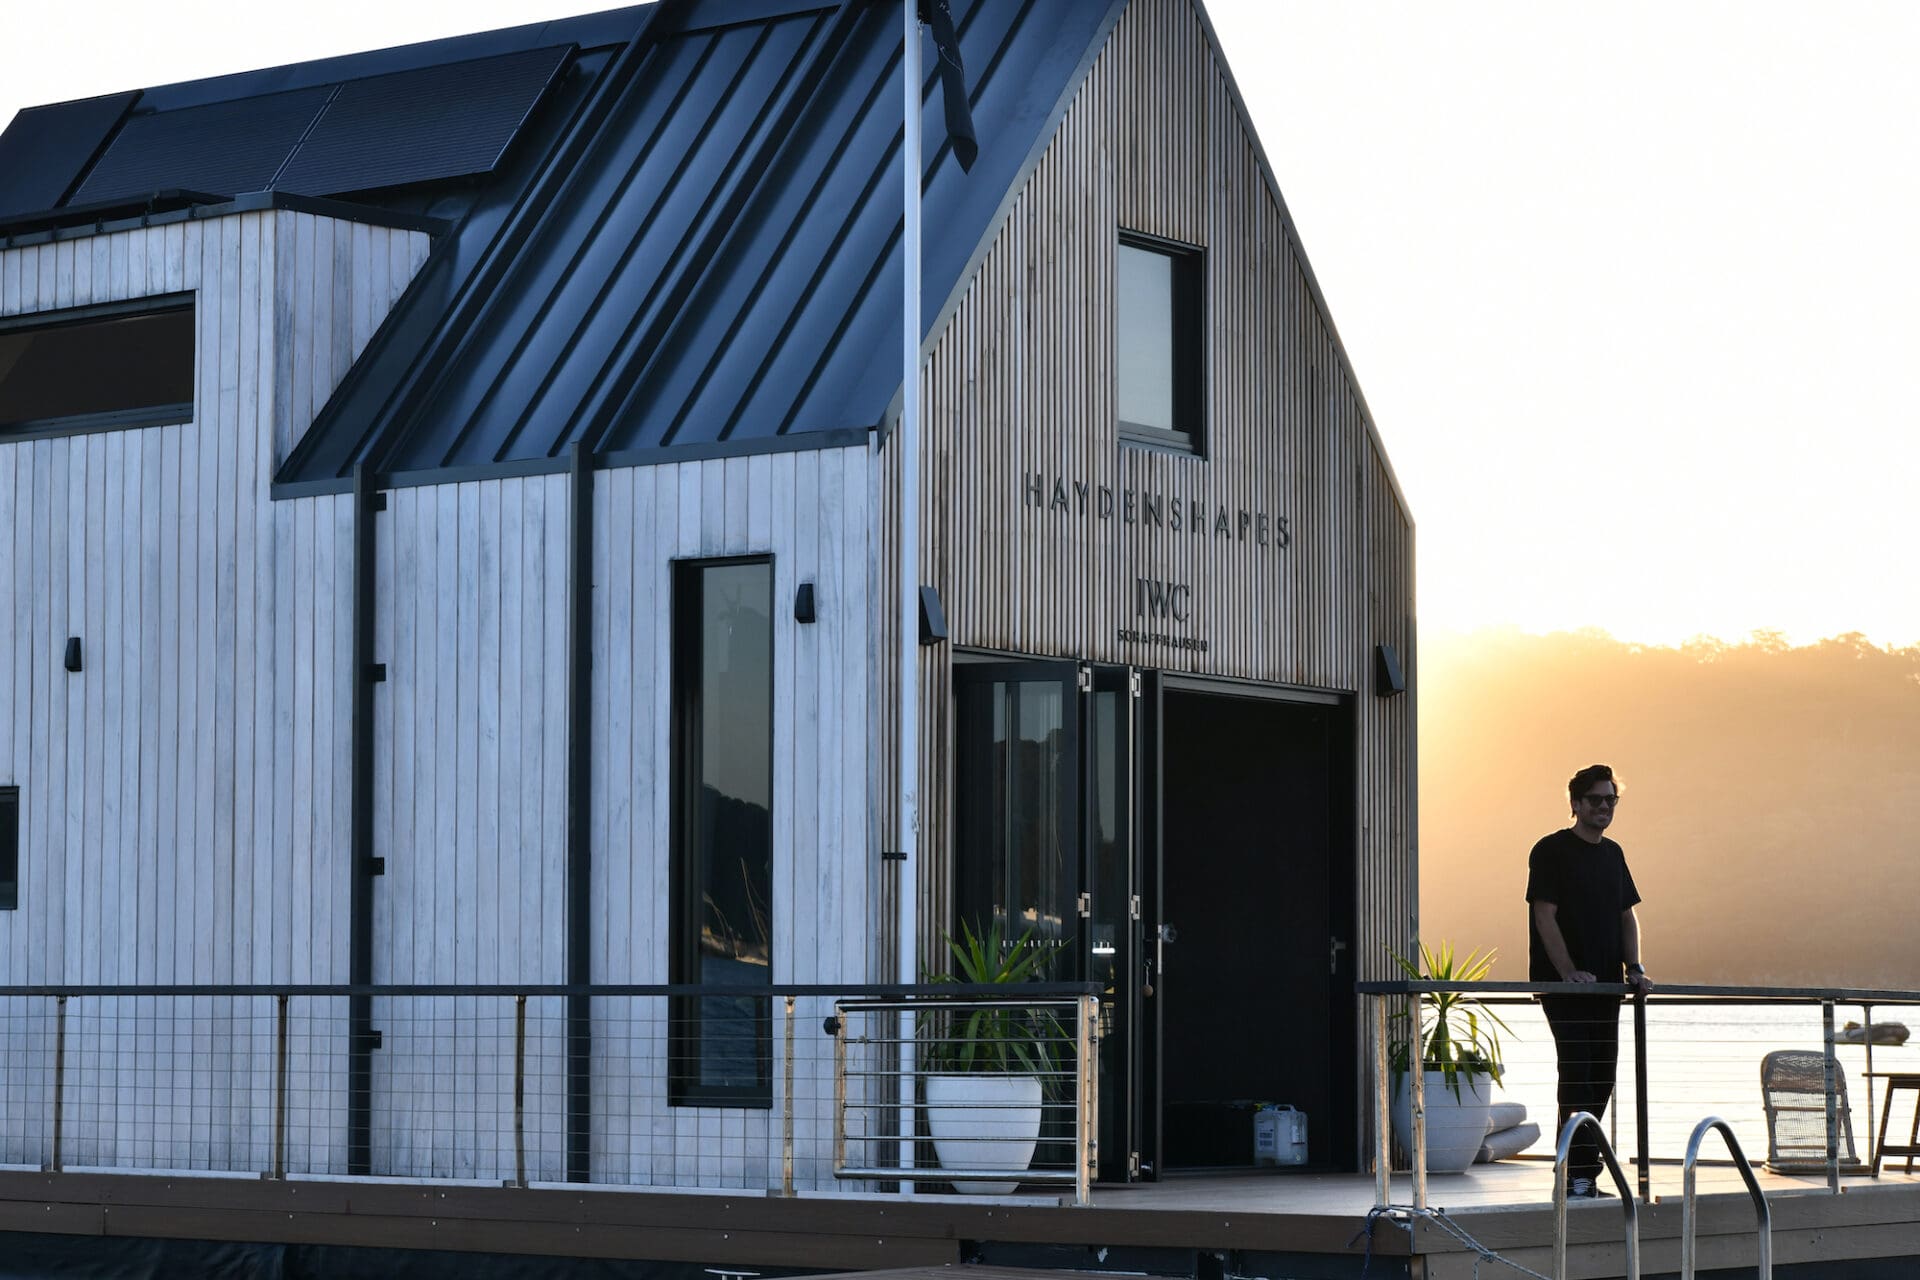 IWC ranked as top Swiss watch brand by WWF for reducing environmental impact, celebrates on tiny floating house